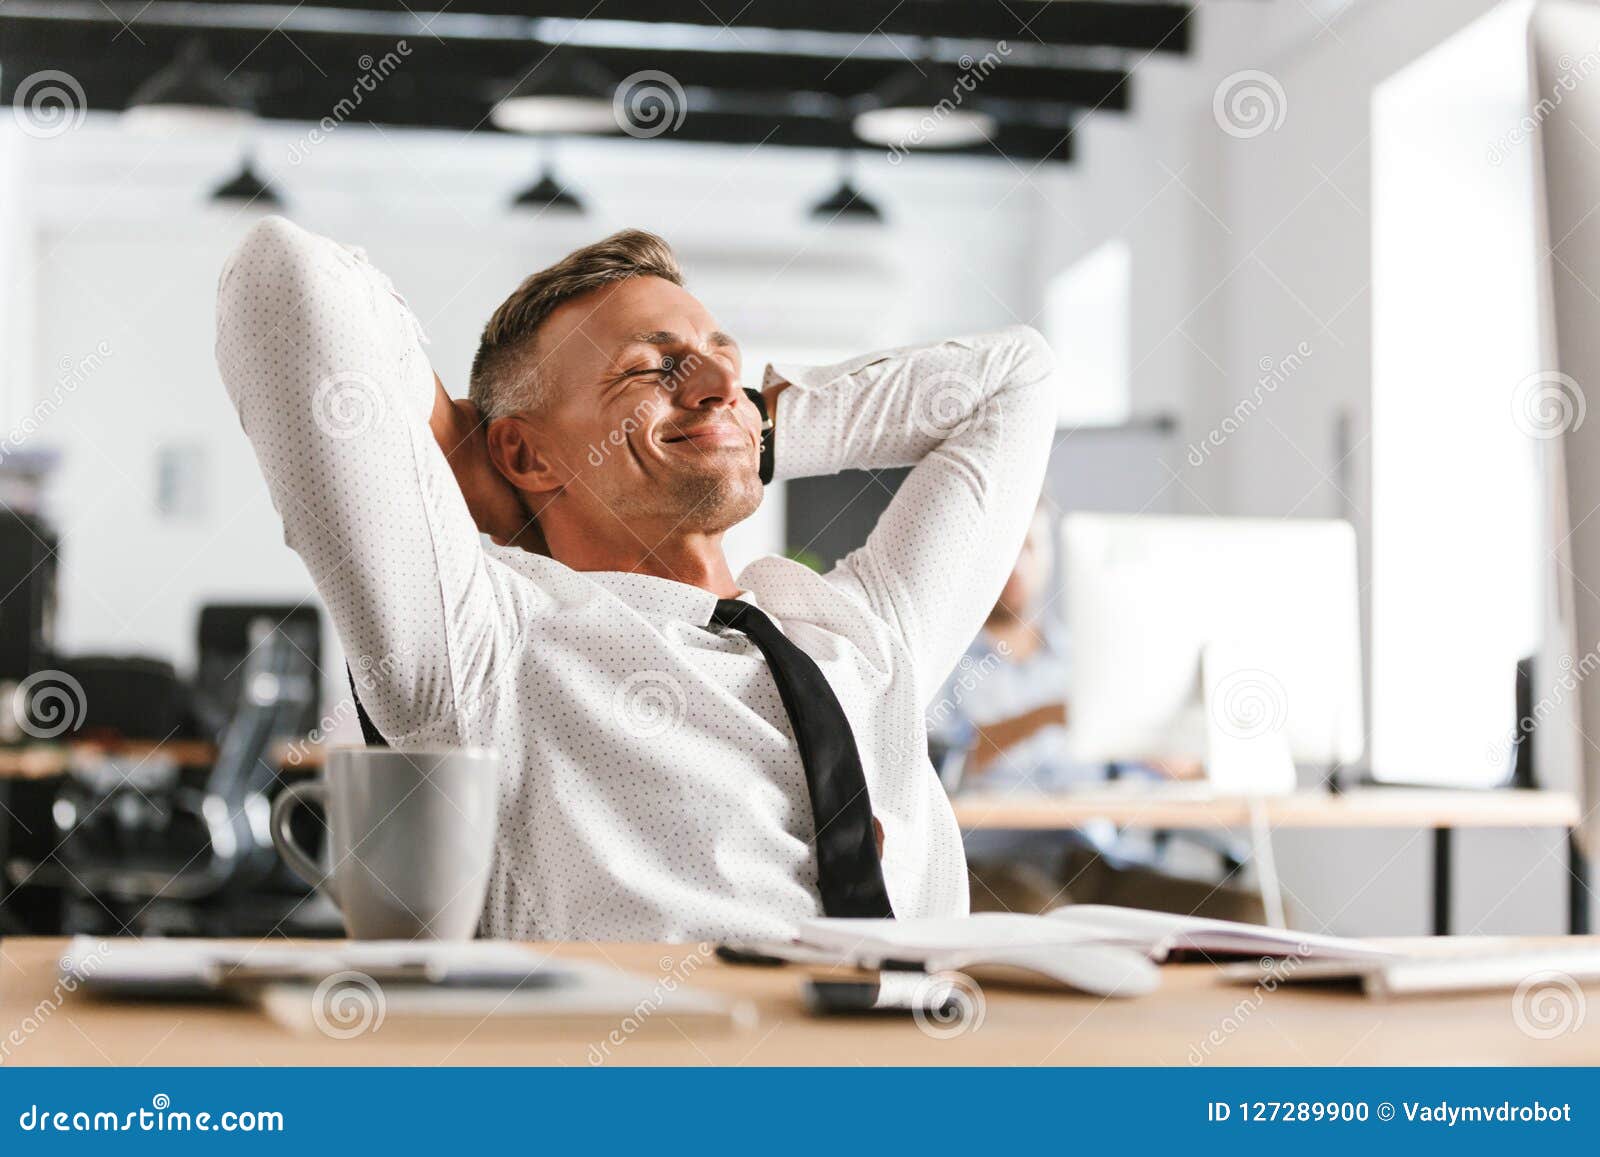 image of pleased middle aged business man relaxing